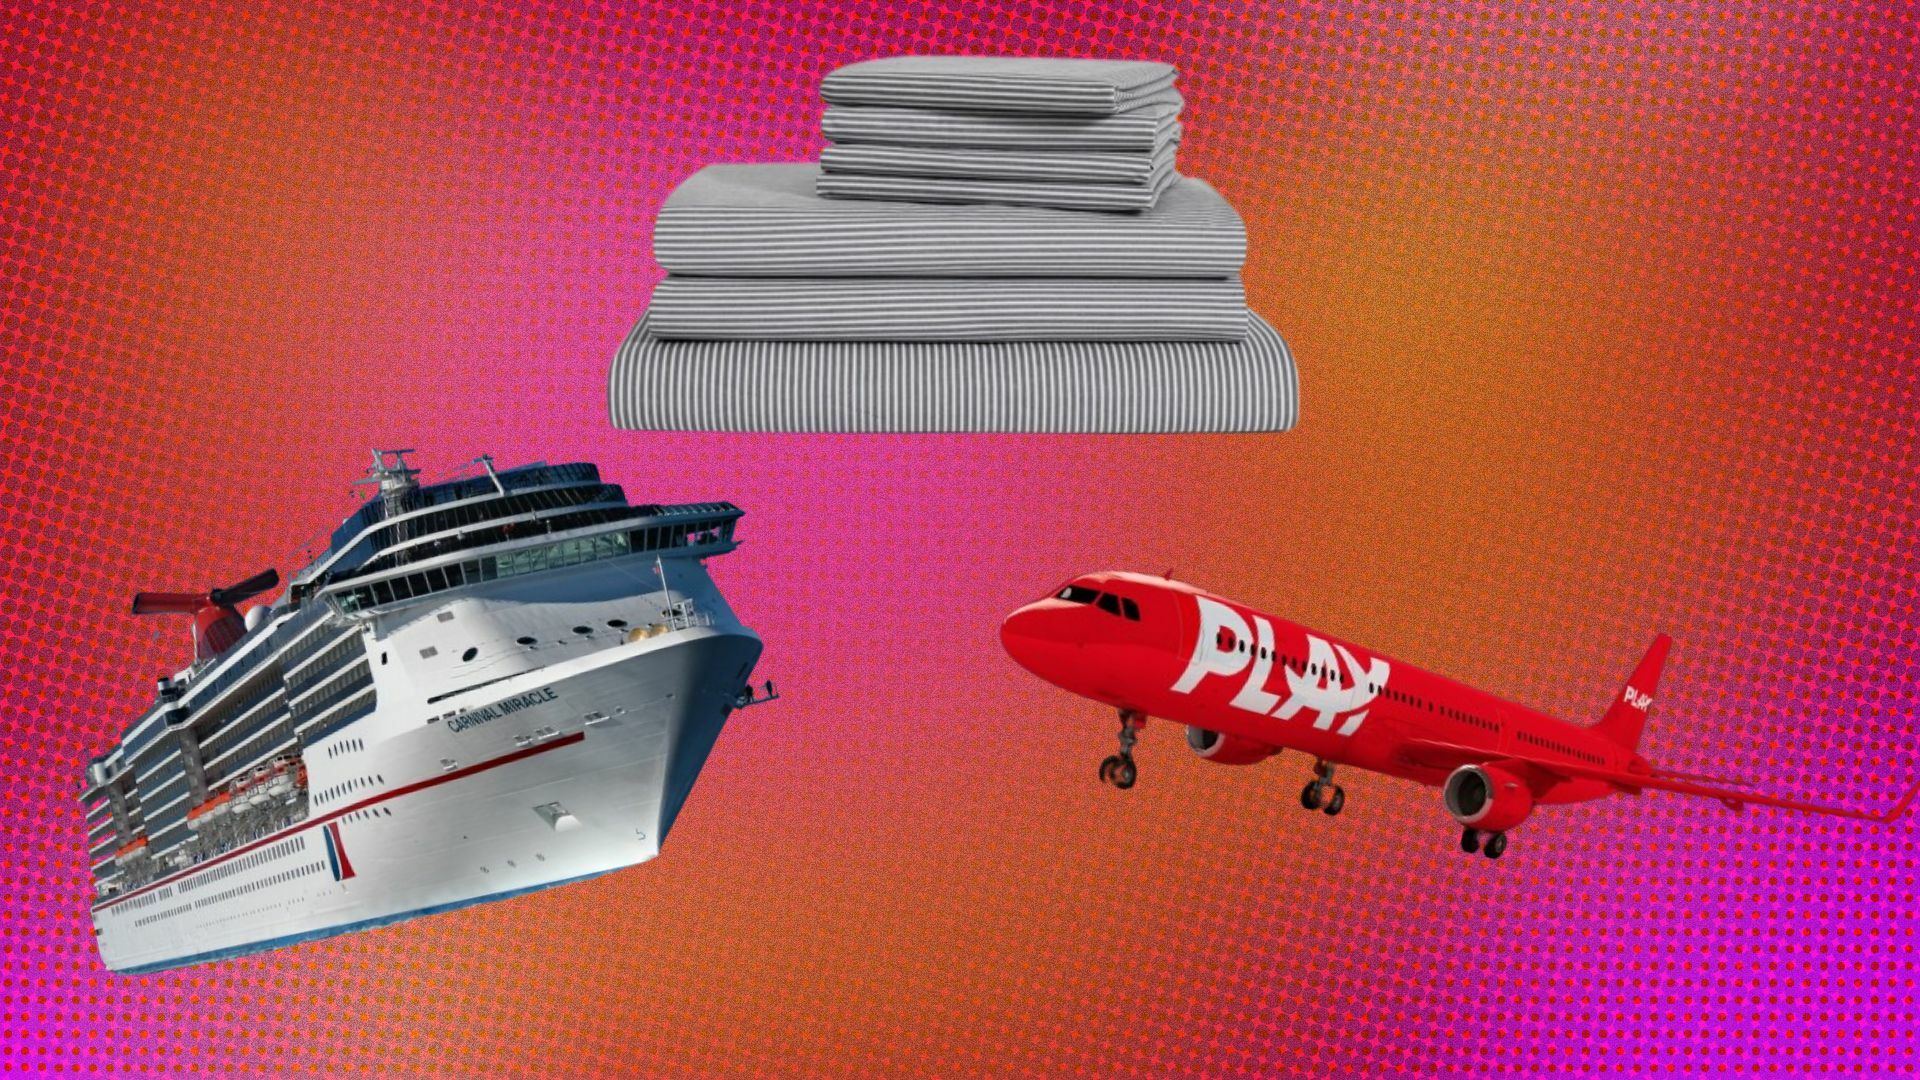 a cruise ship, a set of sheets, and an airplane on a pink and orange background